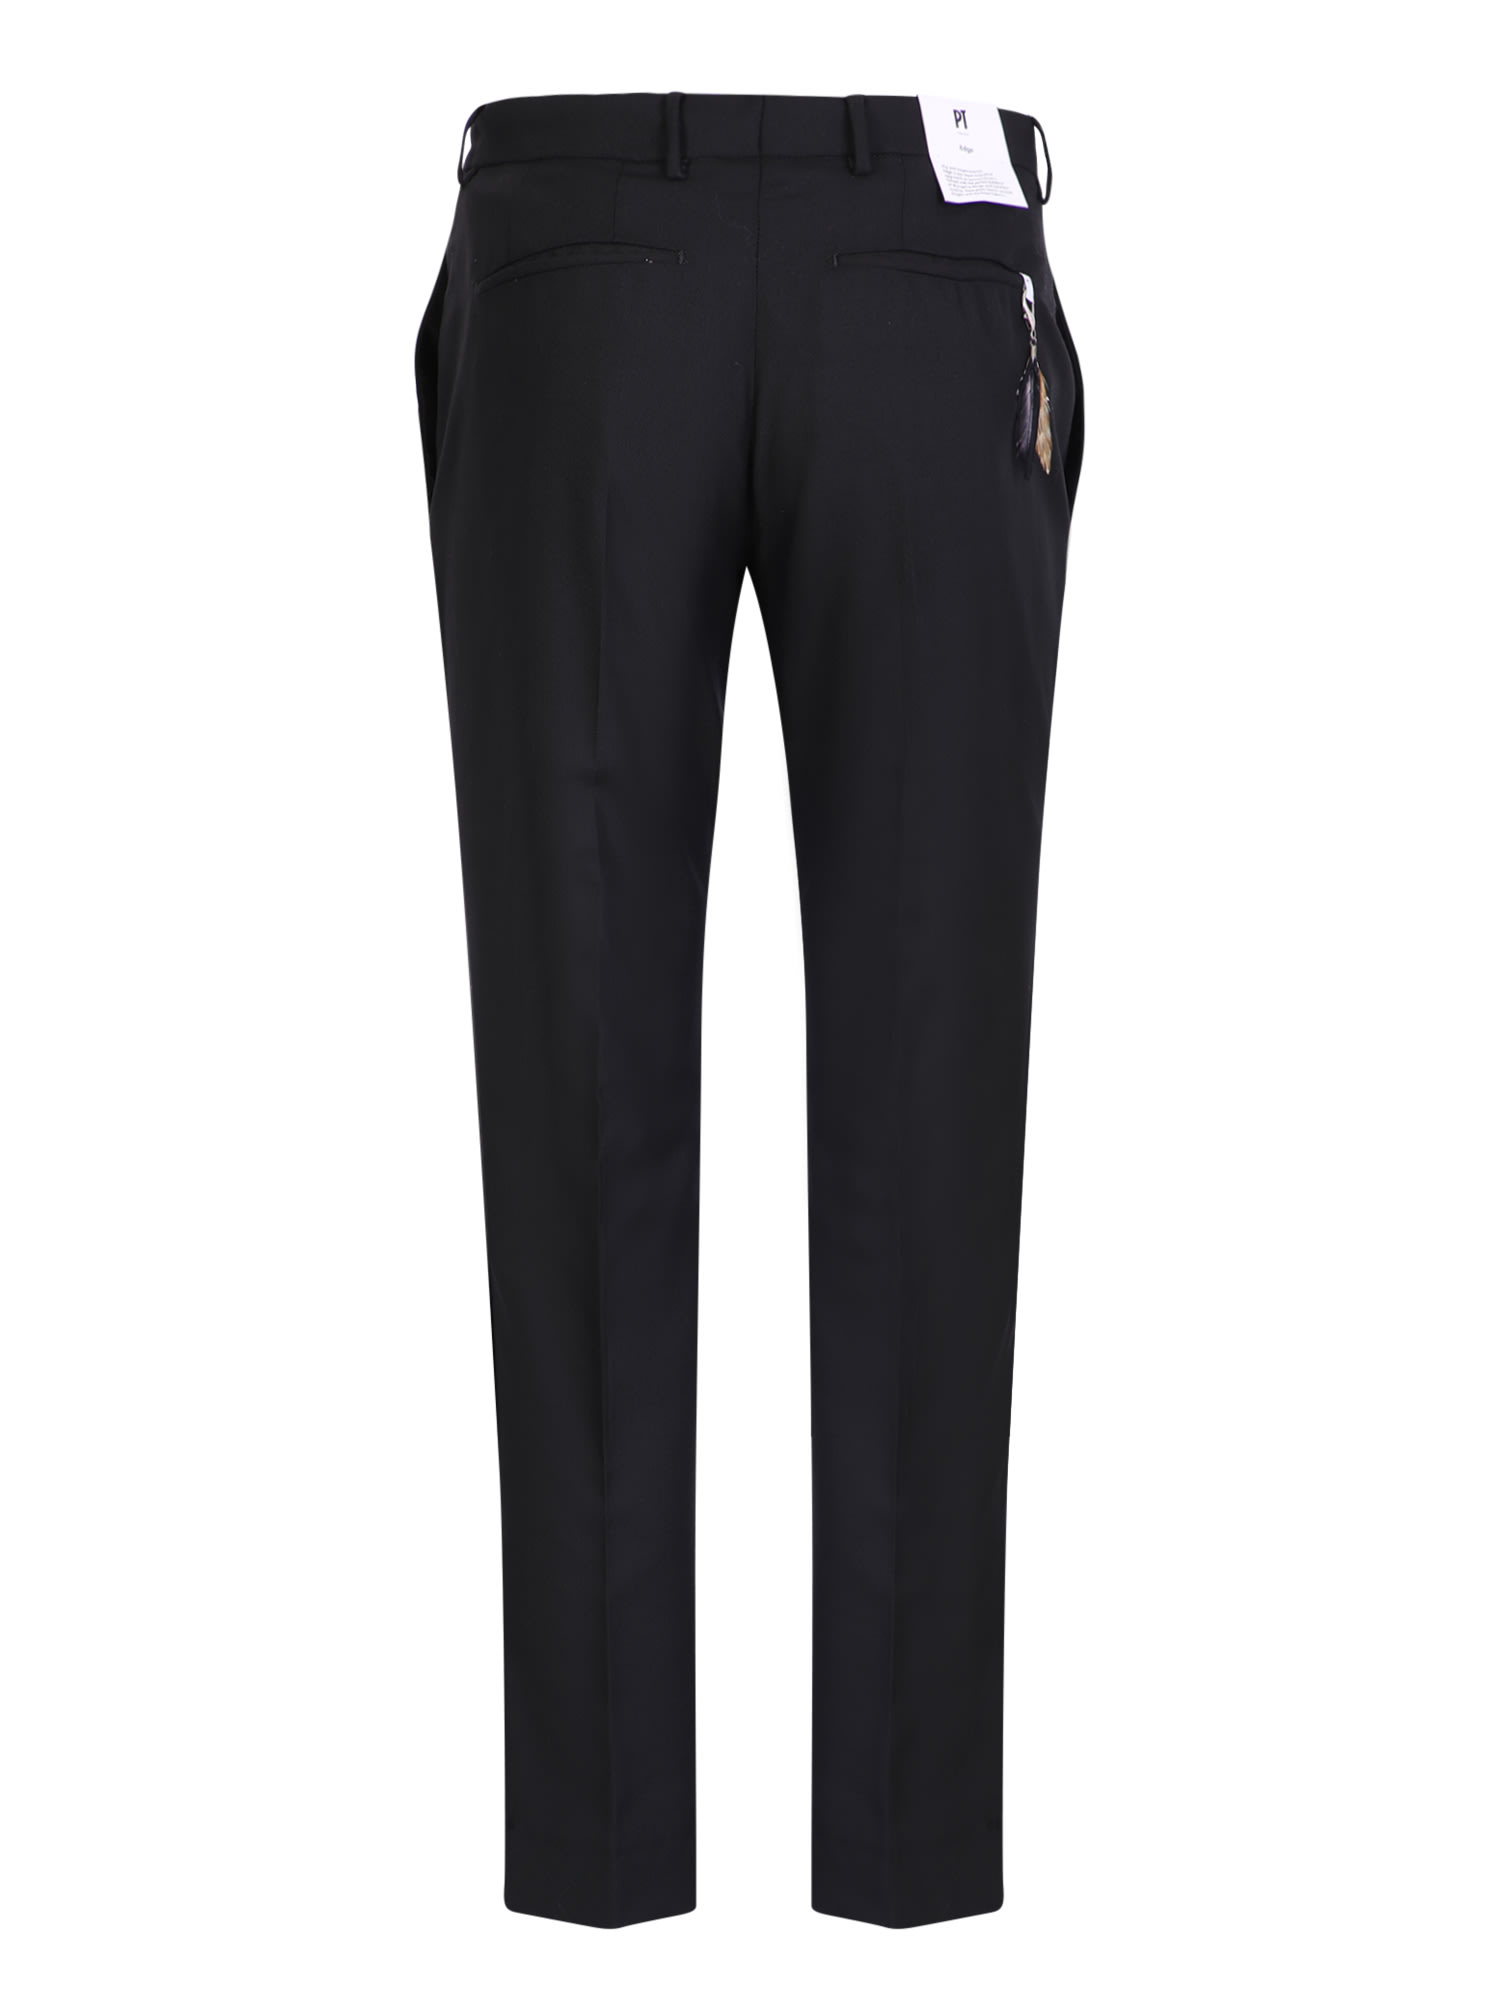 Shop Pt01 Black Skinny Tailored Trousers